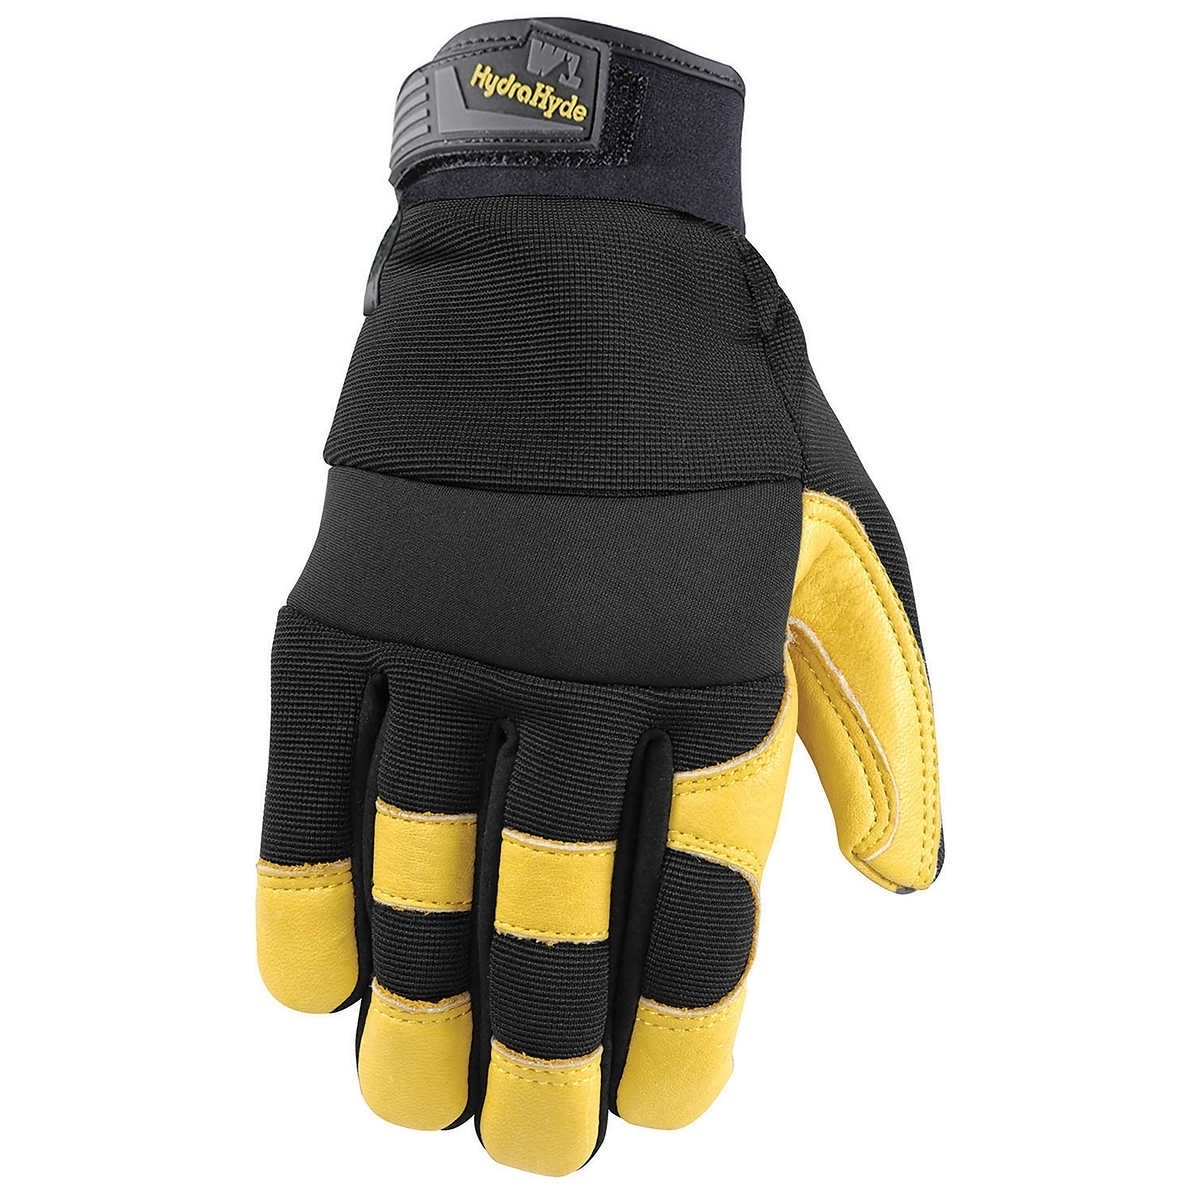 Wells Lamont Men's HydraHyde Leather Work Gloves, X-Large (3 Pairs)